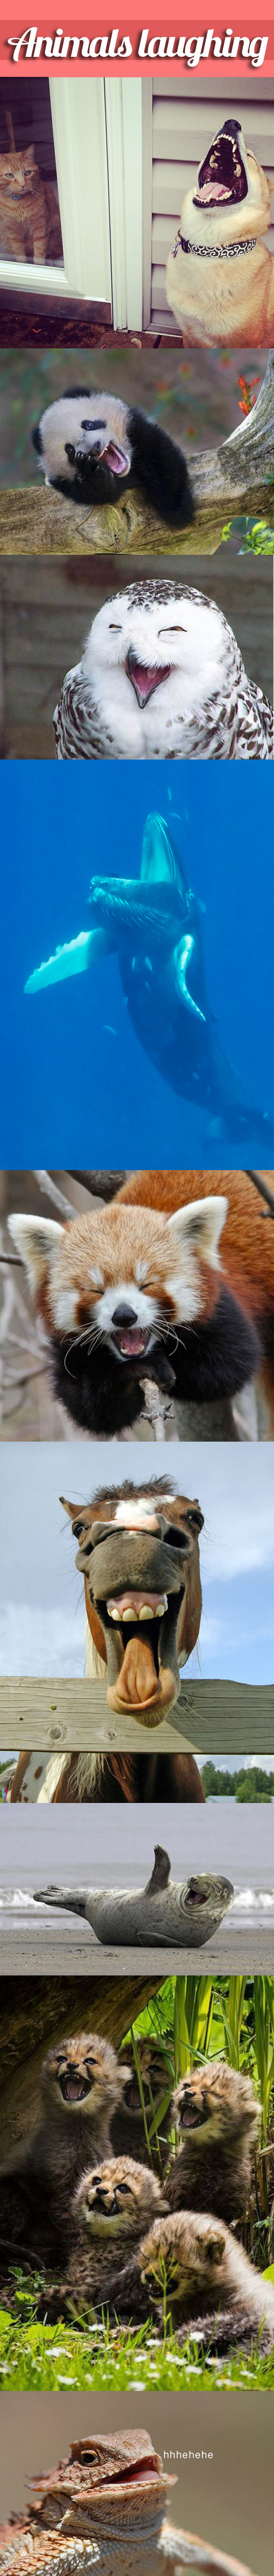 Laughing animals is just plain cute